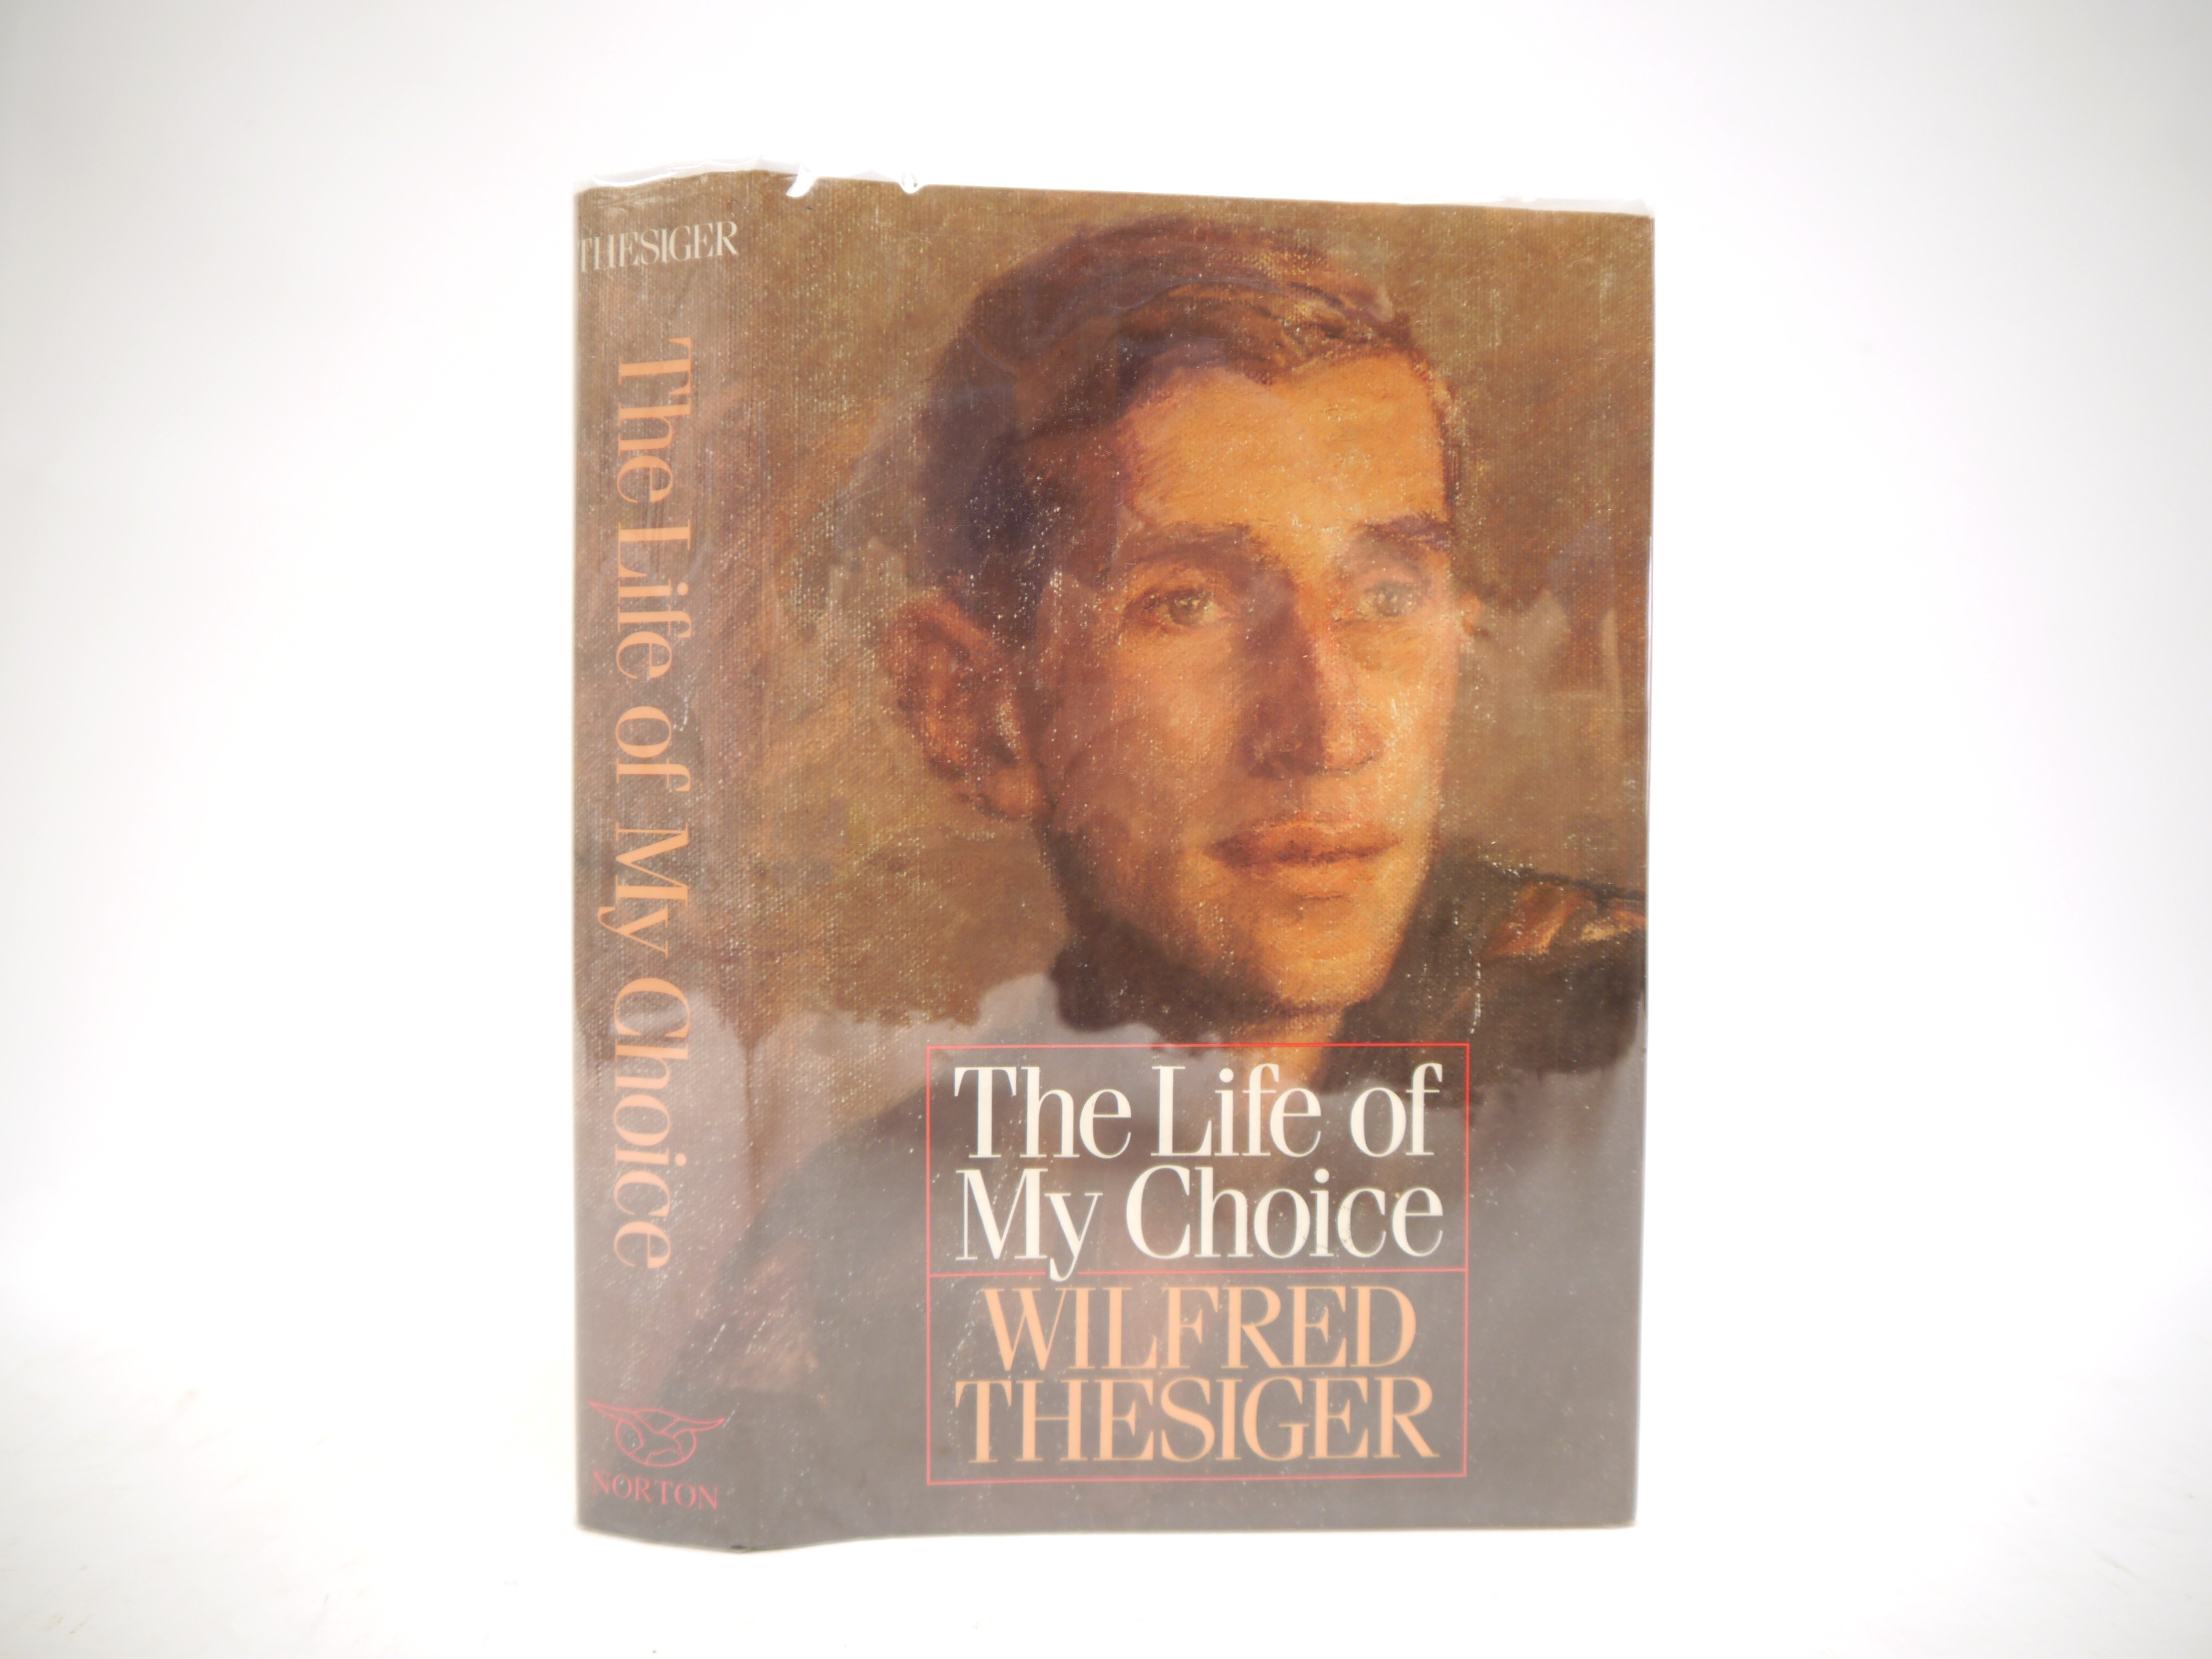 Wilfred Thesiger: 'The Life of My Choice', New York, W.W. Norton & Company, 1988, 1st US edition,